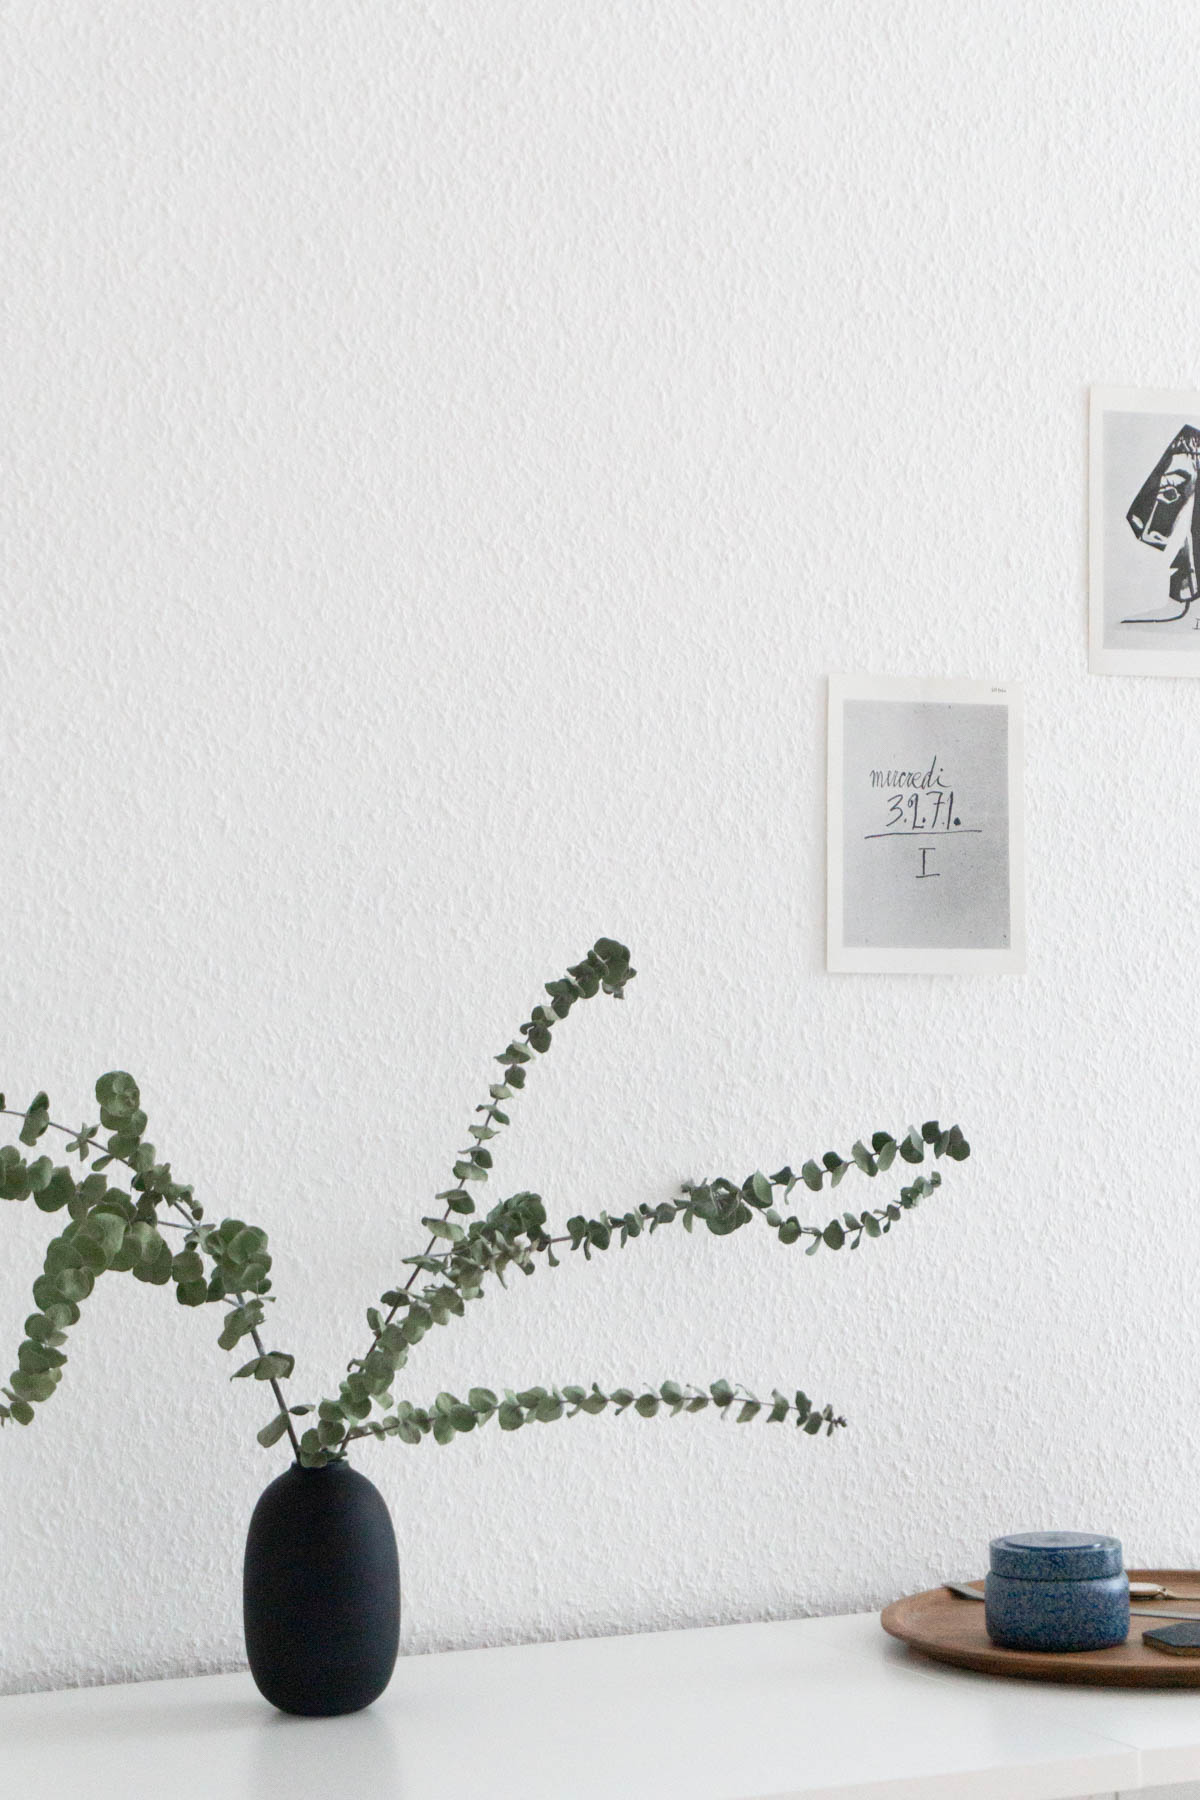 Calming Scandinavian Bedroom Details - Grey and White - RG Daily Blog